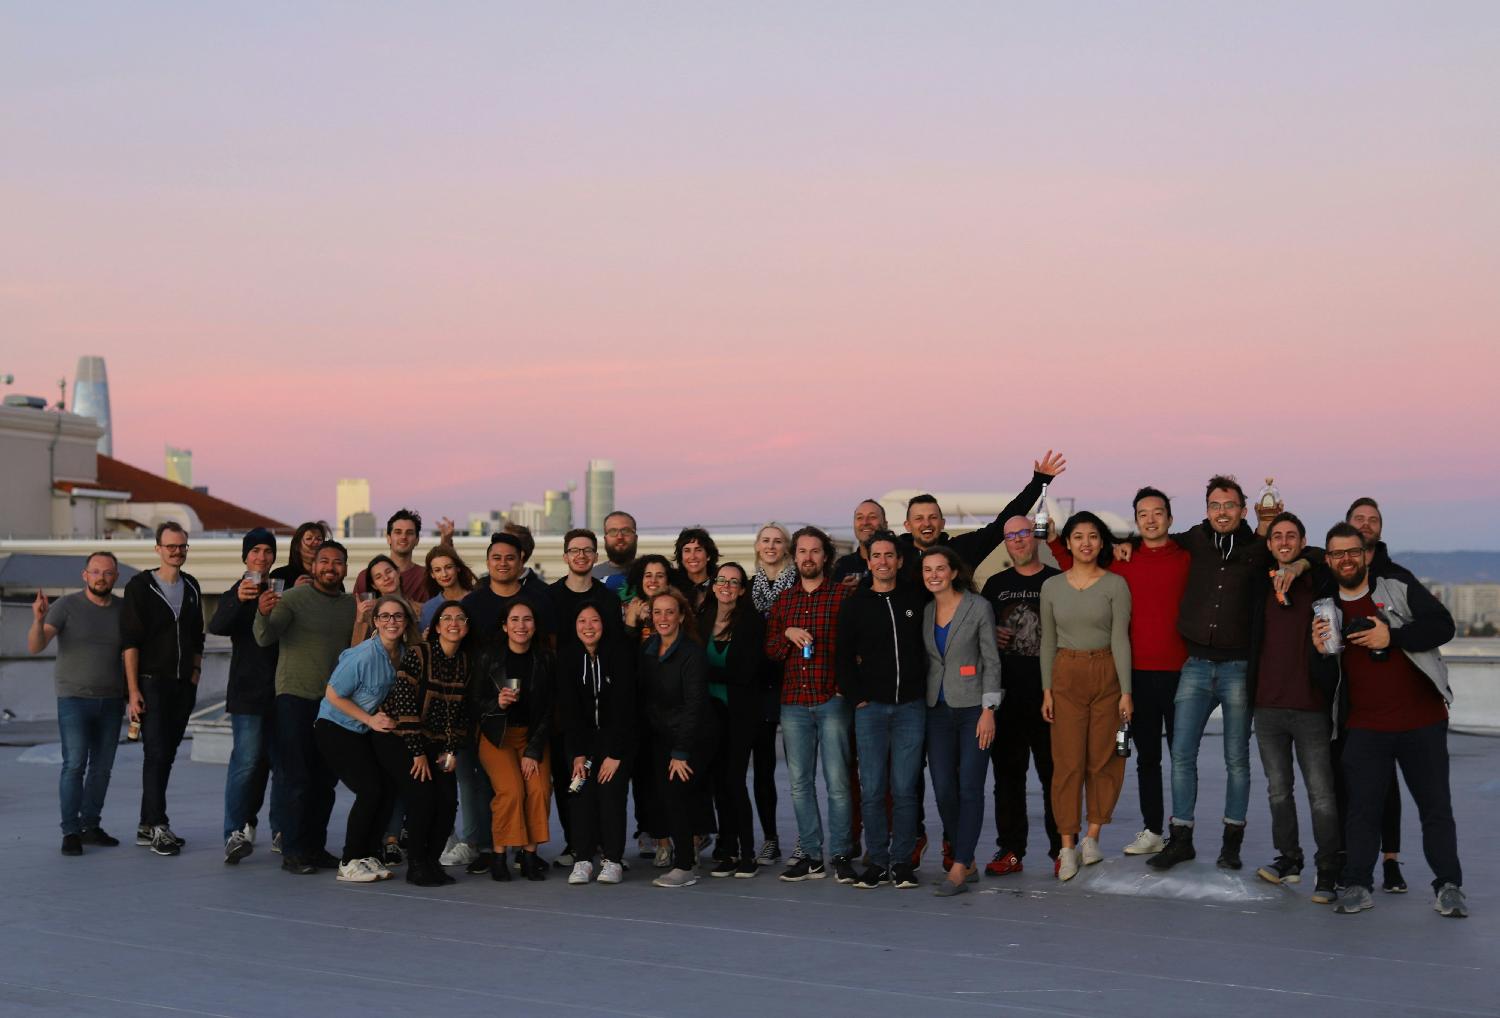 This is from our last offsite in October 2019 when our Swedish team and our Polish team all came to San Francisco. Since then we've added 16 employees to the team. 